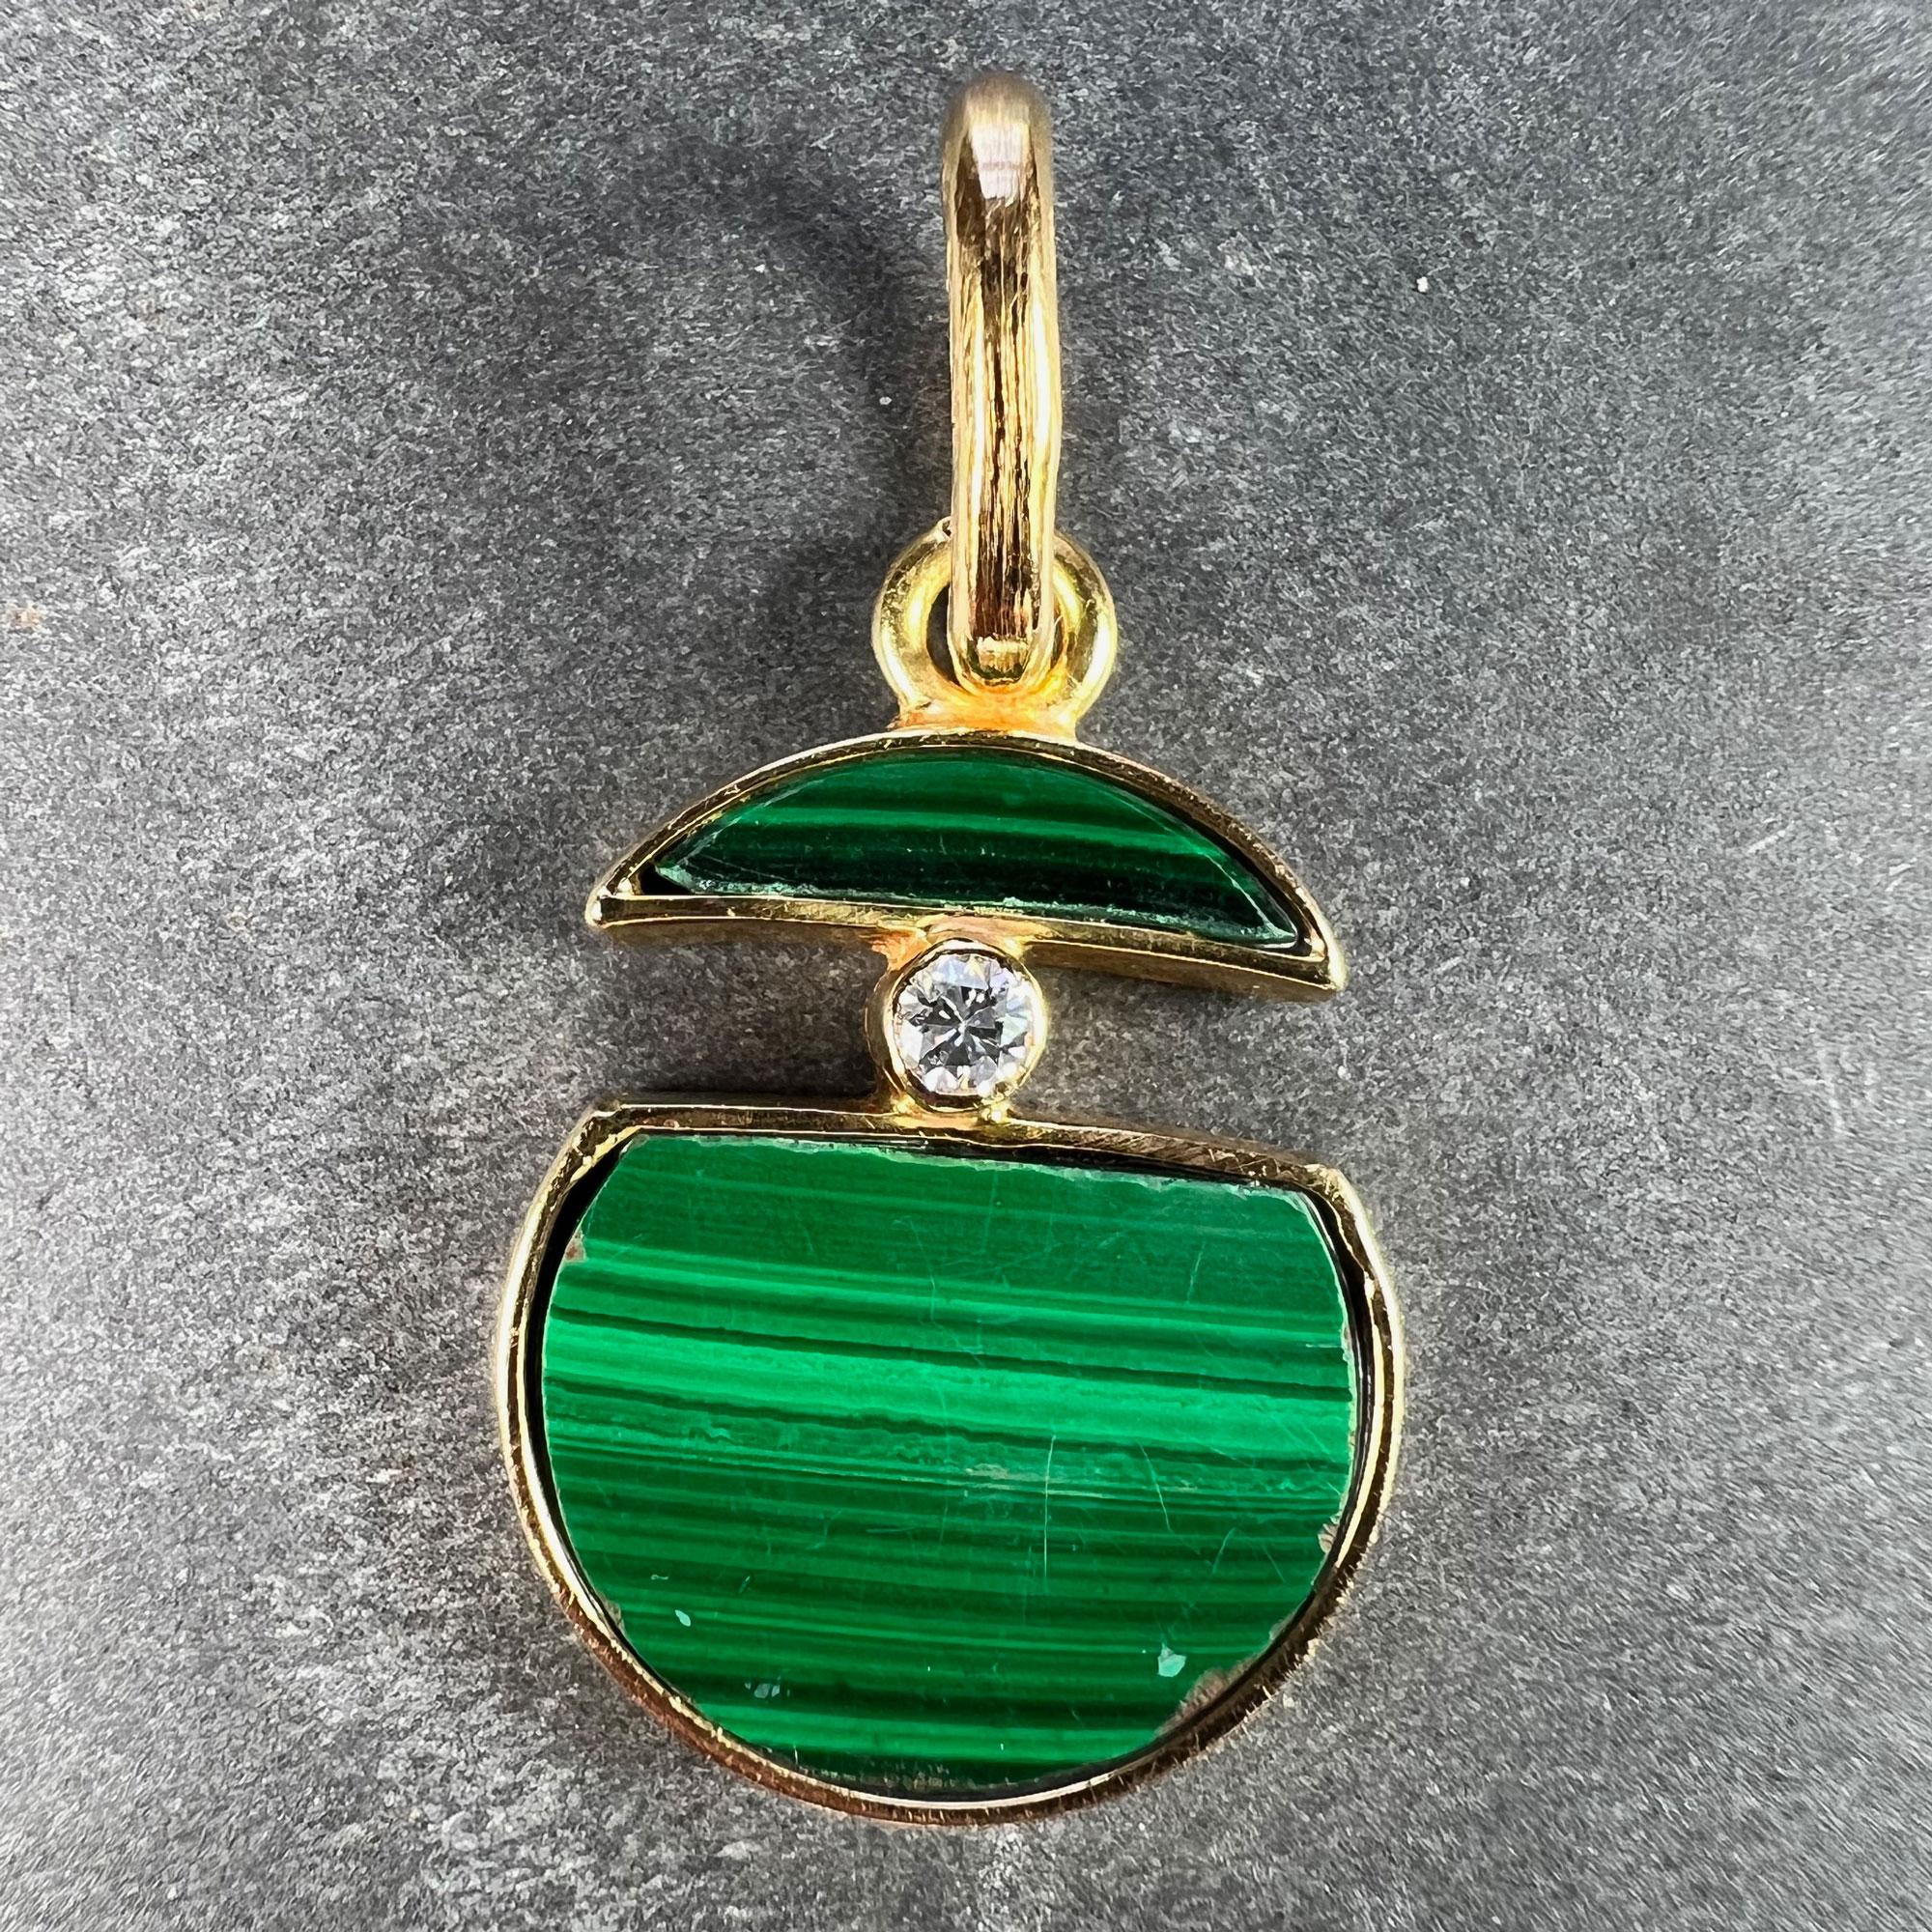 An 18 karat (18K) yellow gold charm pendant designed as a split circle of polished green malachite, set to the centre of the split section with a round brilliant-cut diamond weighing approximately 0.12 carats. Stamped with the owl mark for 18 karat